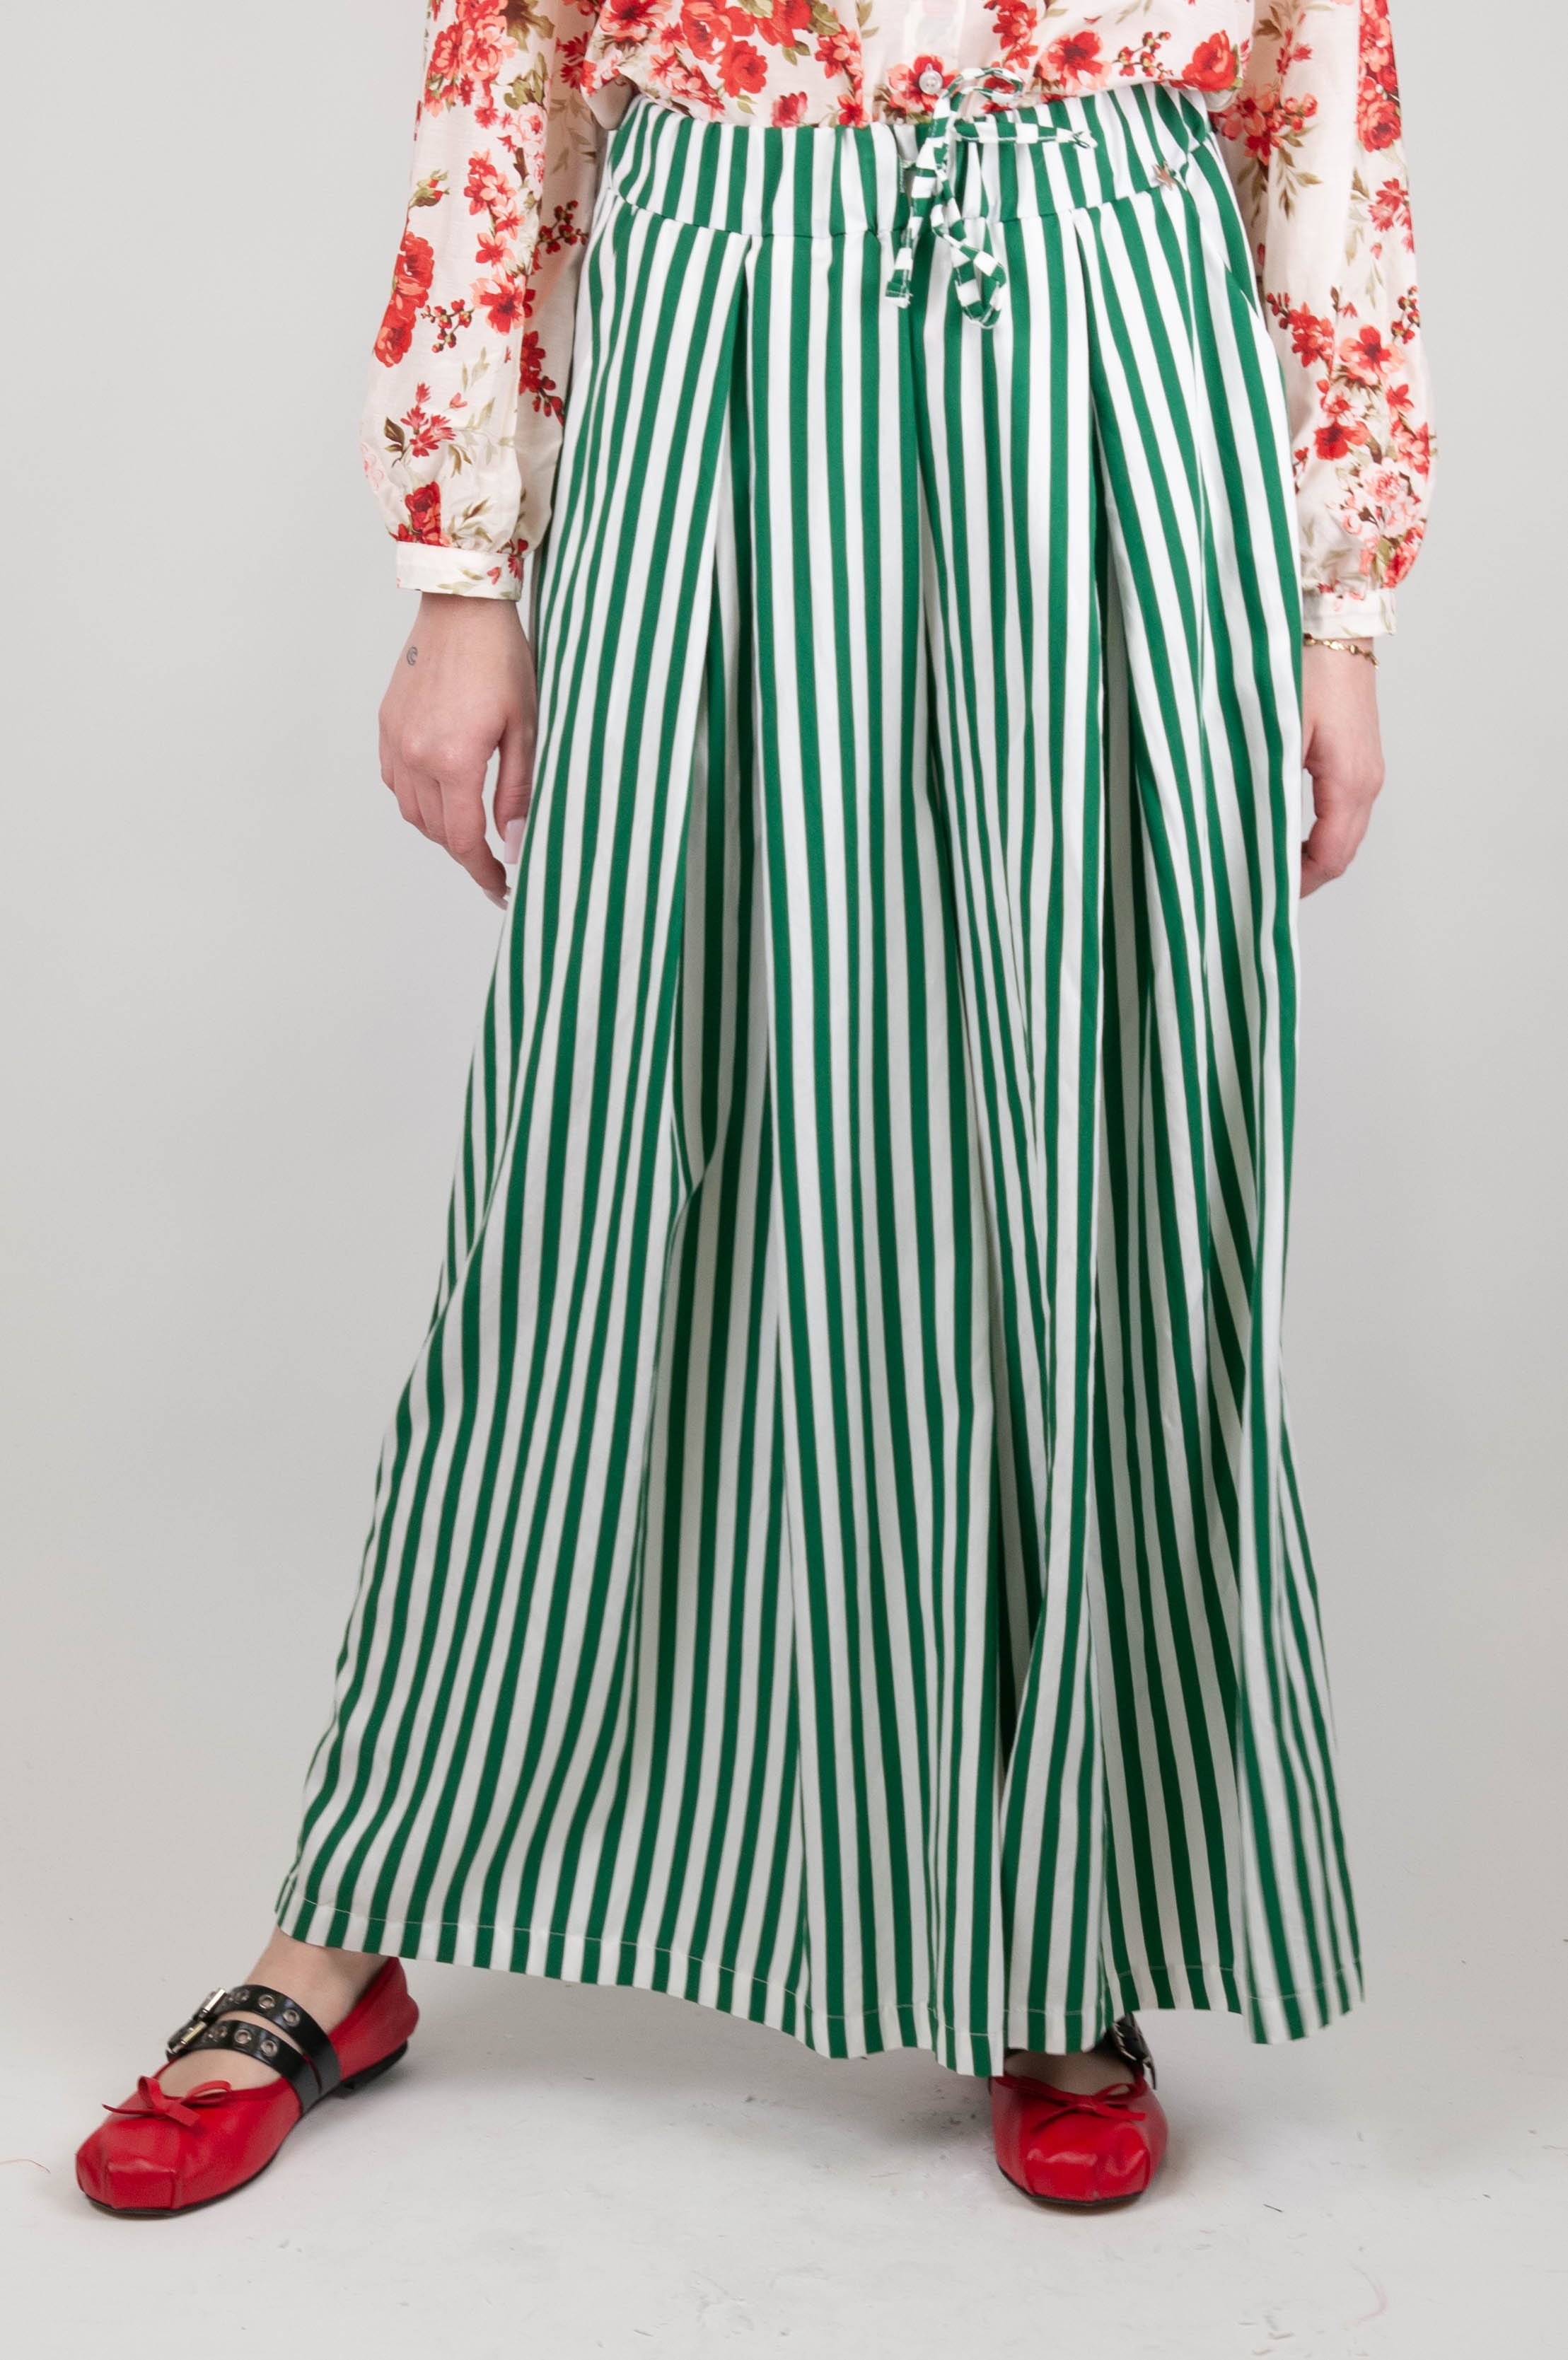 Souvenir - Striped palazzo trousers with drawstring